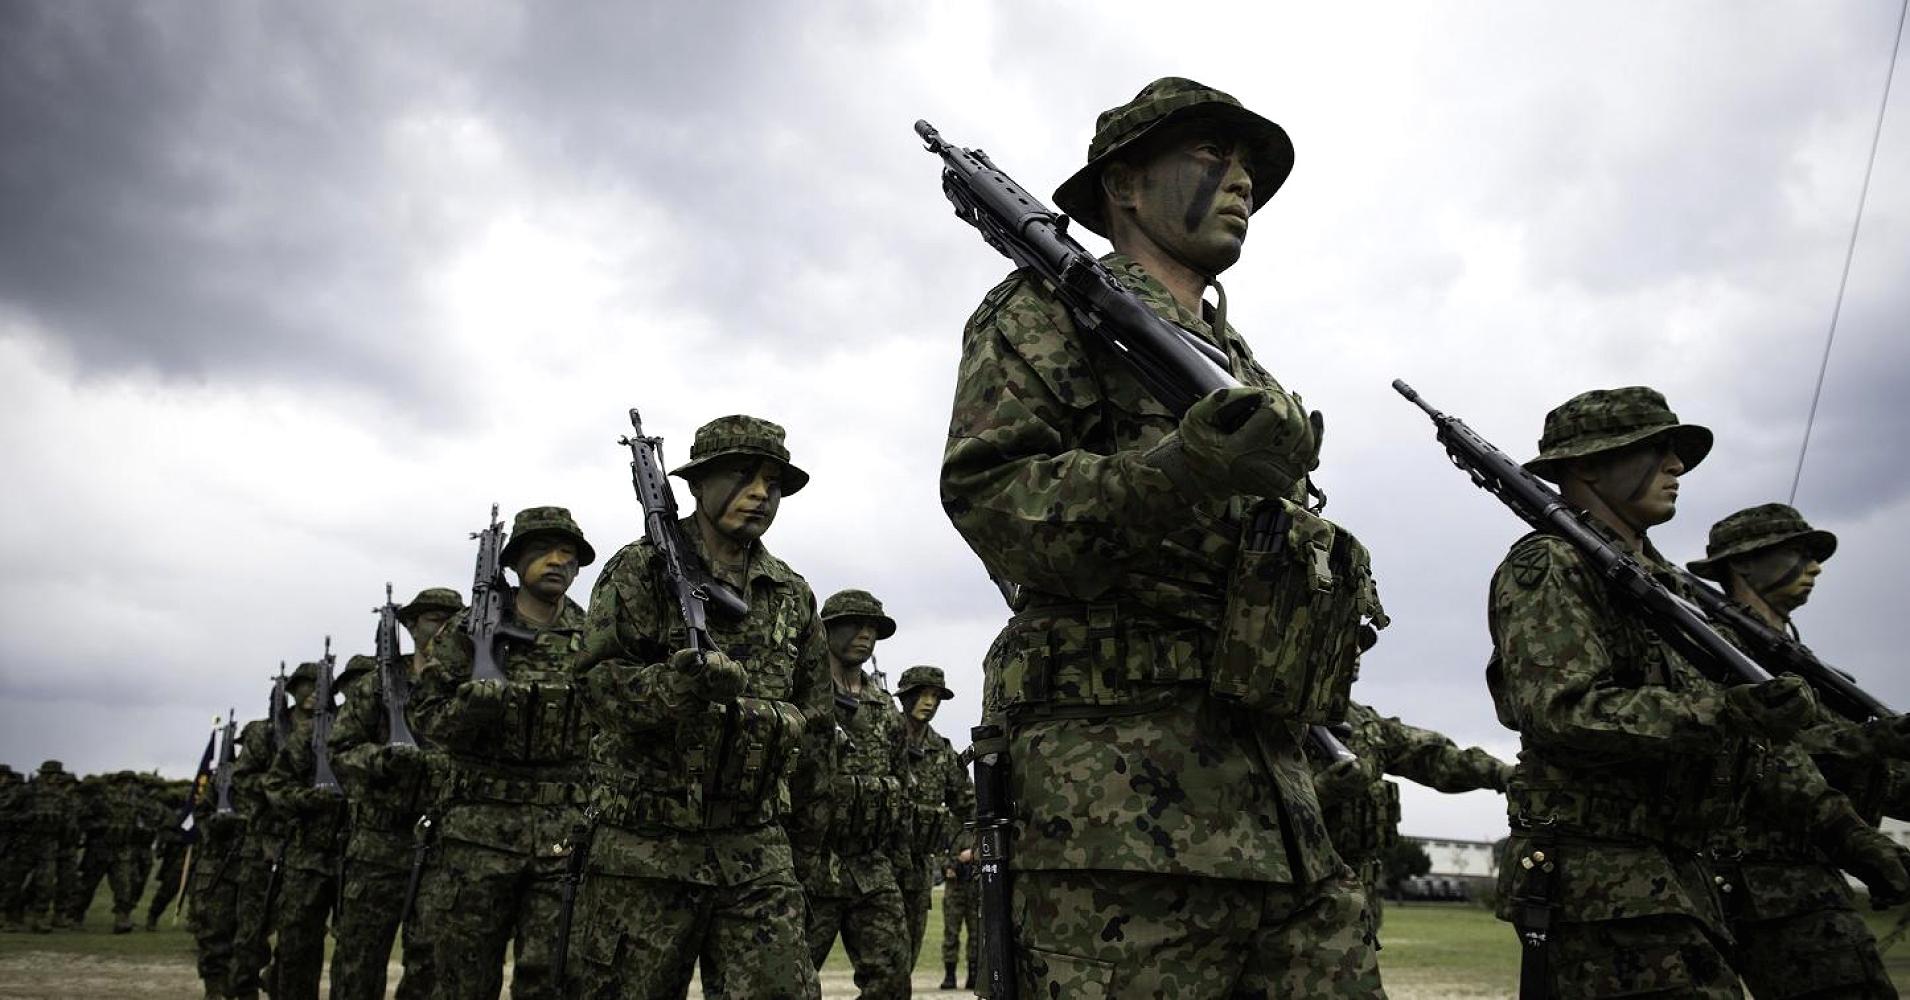 Japan activates first marines since World War II to bolster defenses against China